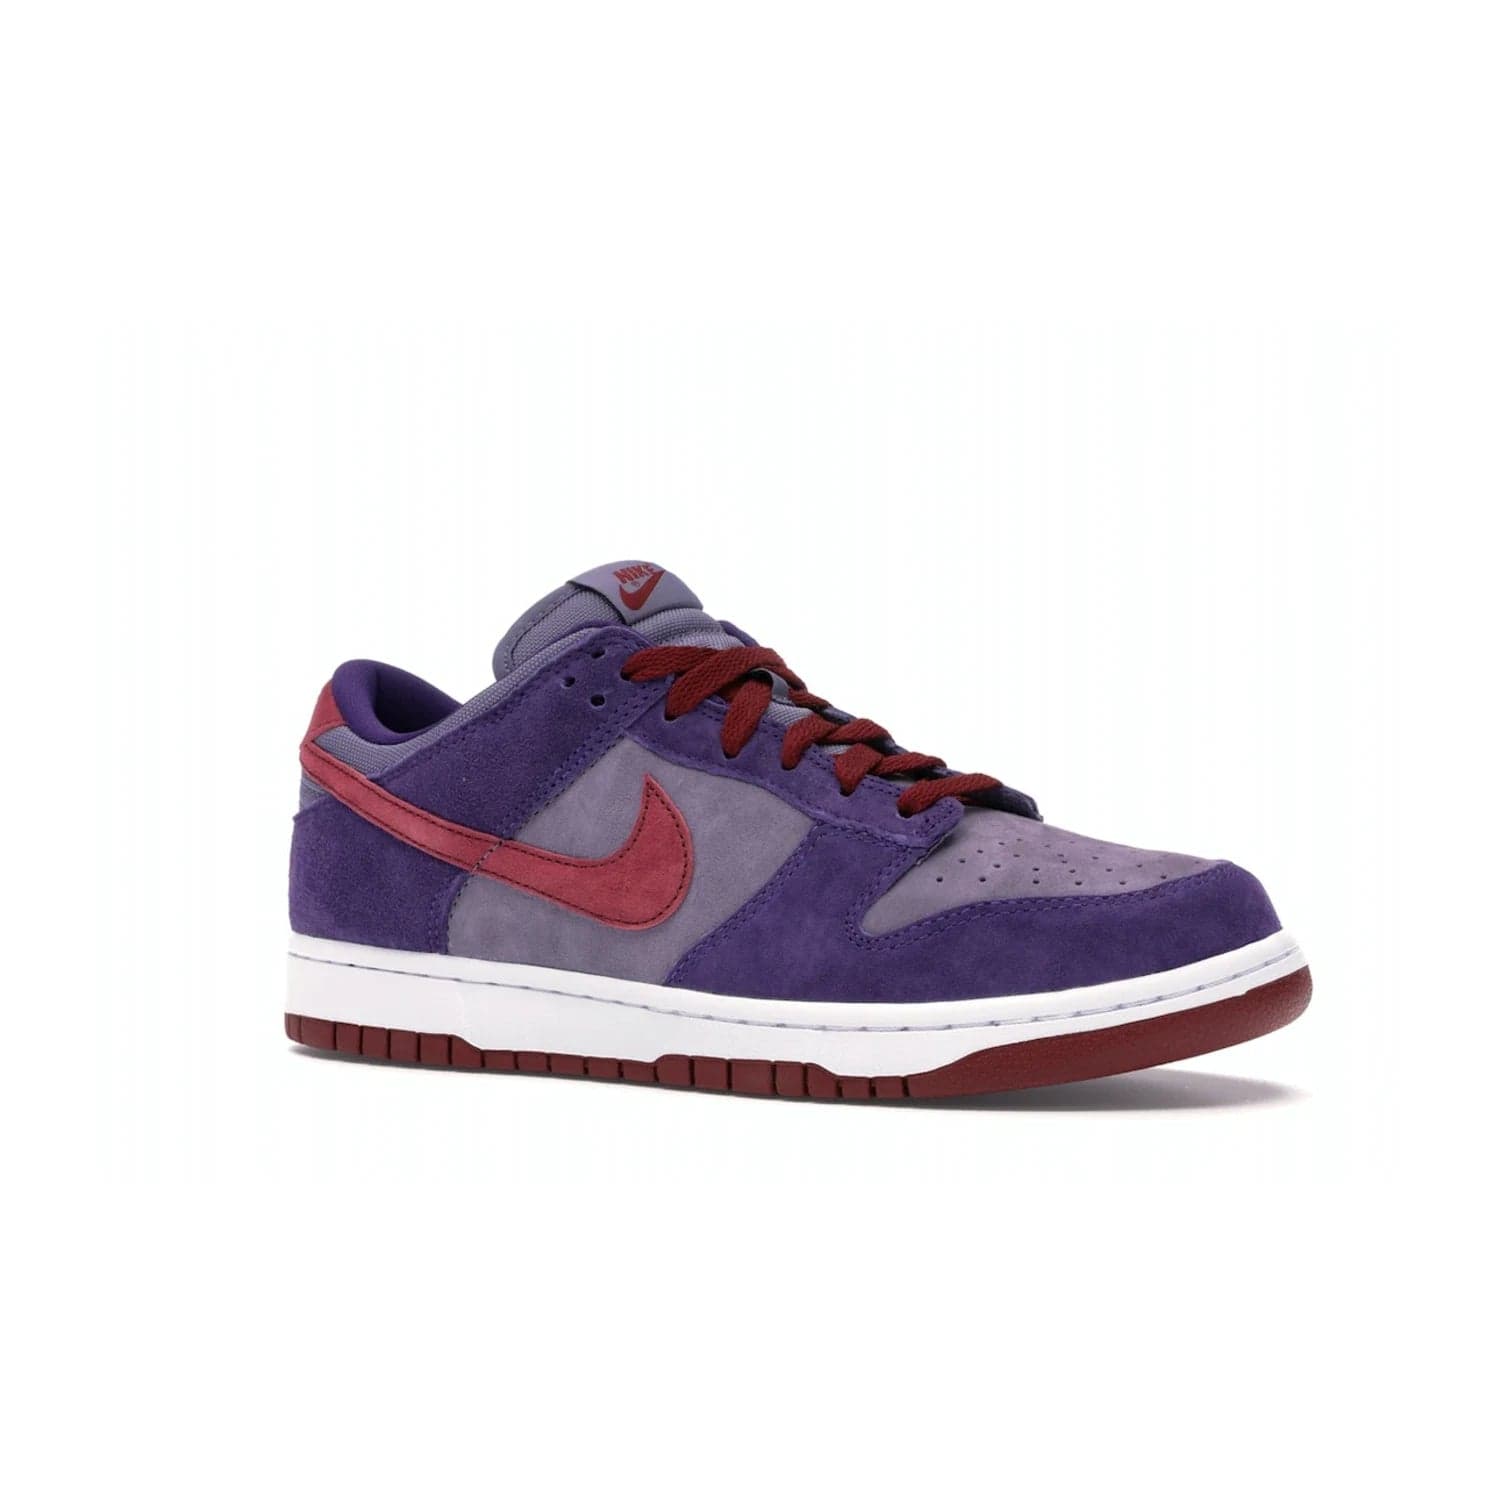 Nike Dunk Low Plum (2020) - Image 4 - Only at www.BallersClubKickz.com - Elevate your look with the Nike Dunk Low Plum (2020). Featuring a bold purple colorway, this retro-inspired silhouette is constructed of premium suede and makes for a must-have for any sneakerhead.